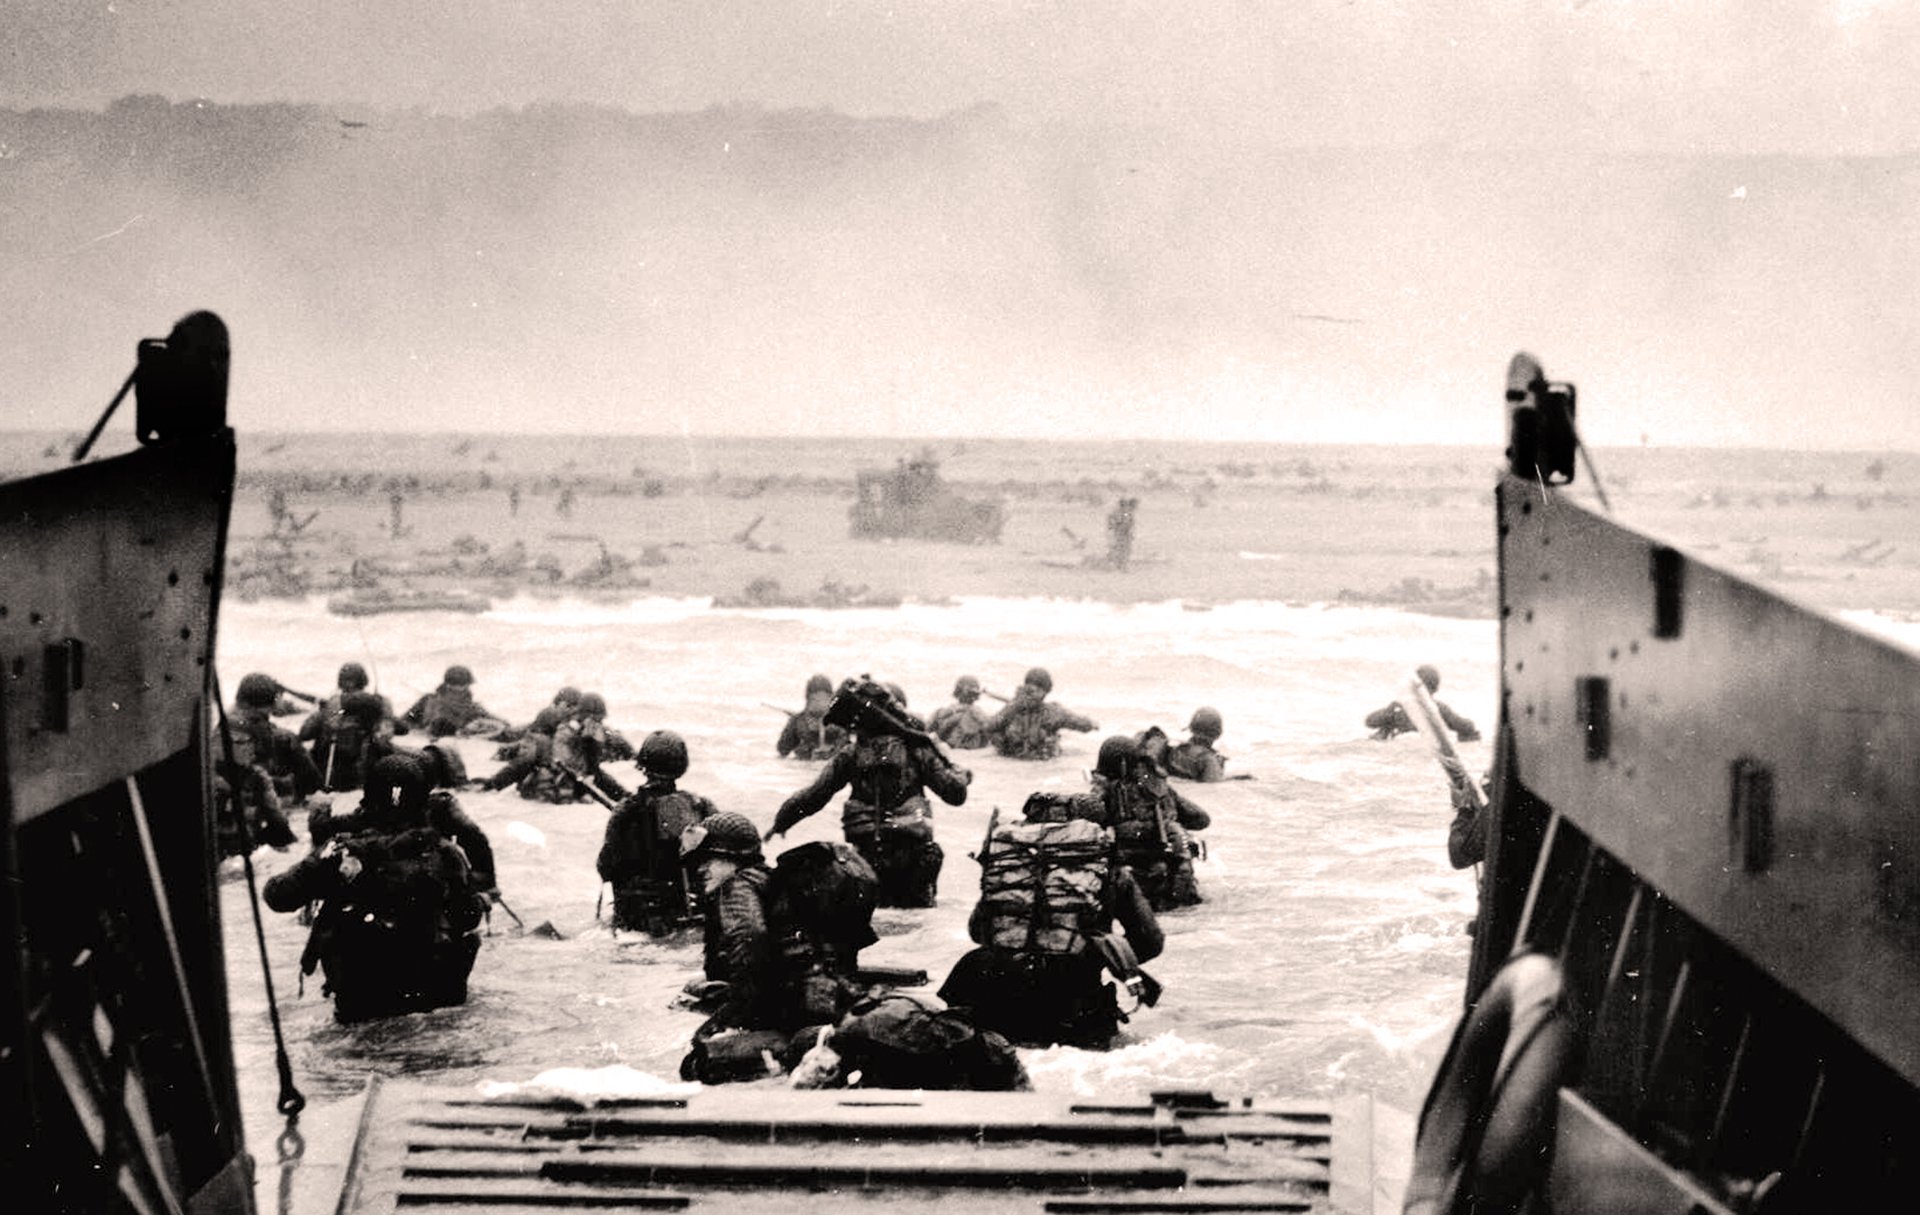 A black and white historical photo of soldiers disembarking from a landing craft onto Omaha Beach, France. The soldiers are carrying heavy backpacks and equipment. The photo is taken from the perspective of the landing craft, looking out towards the beach.